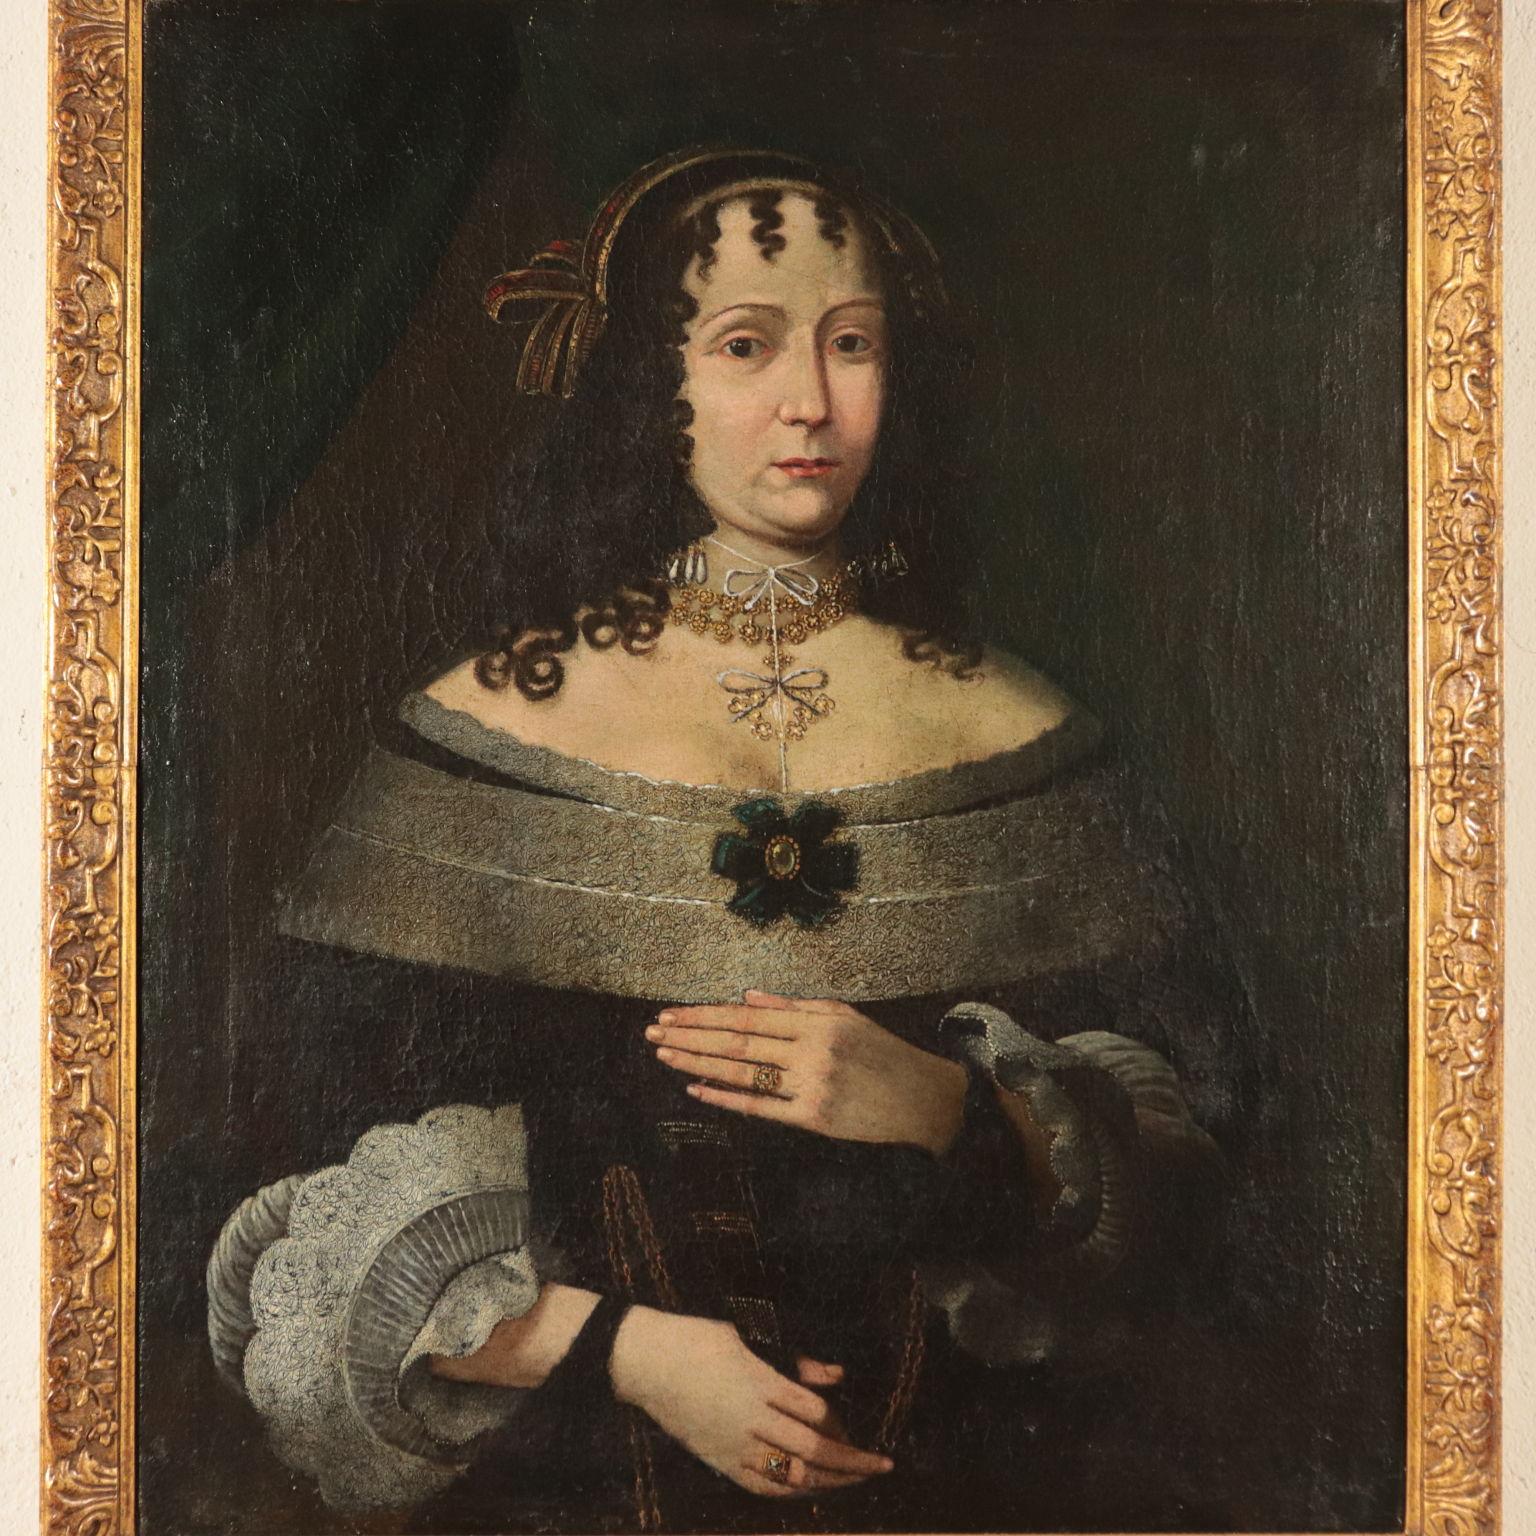 Portrait of a Noblewoman, Oil on Canvas, 17th Century - Other Art Style Painting by Unknown